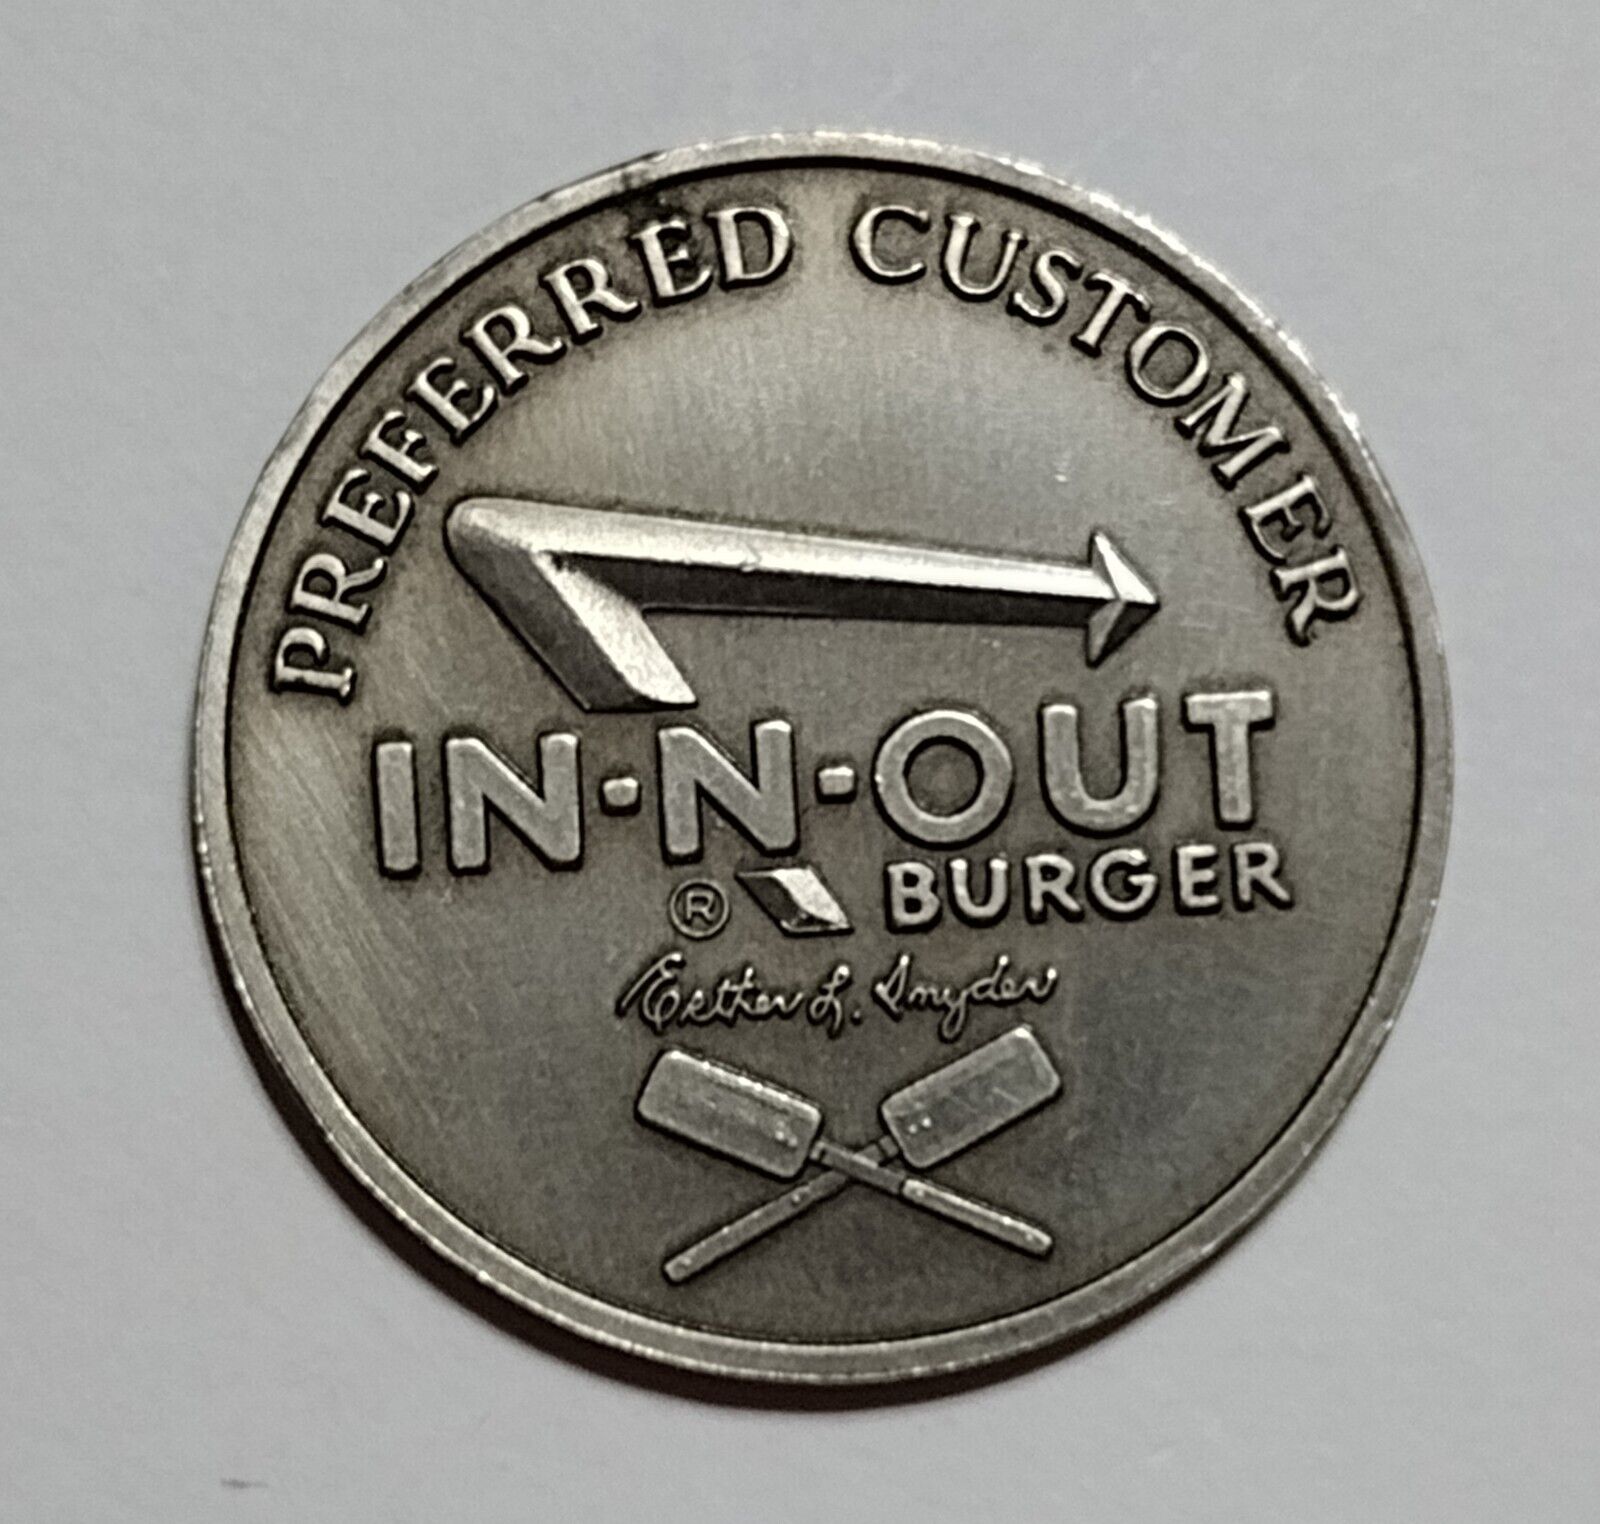 IN-N-OUT Burger Commemorative 1986 Burger Coin